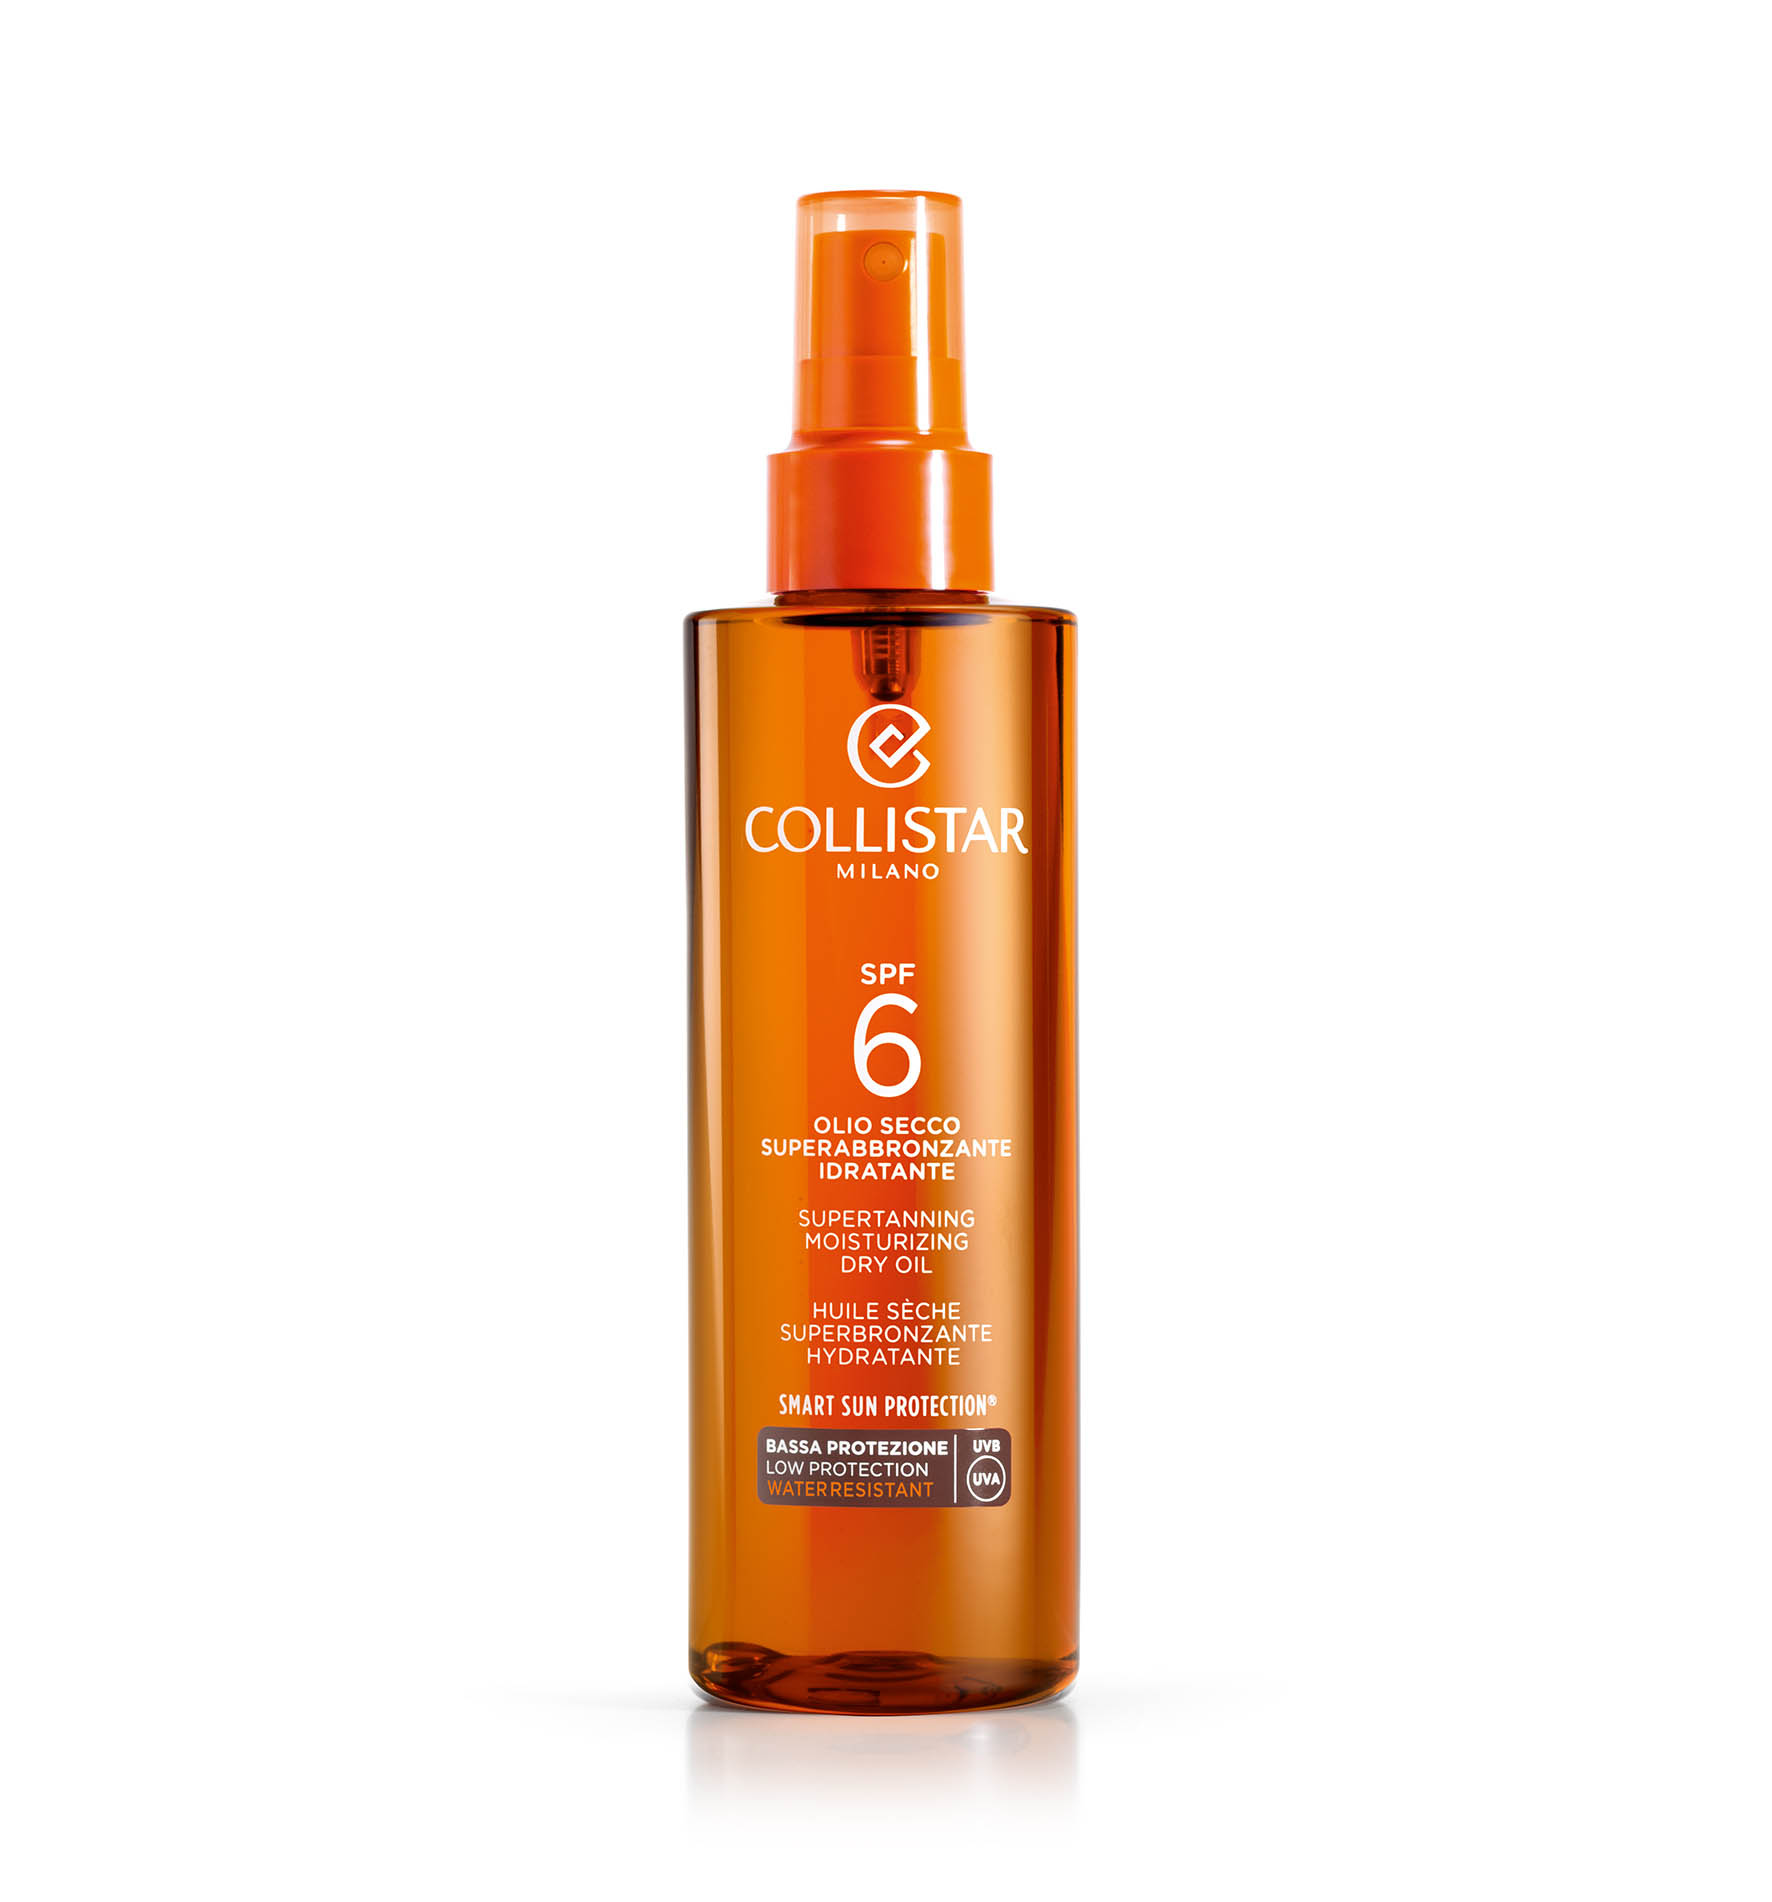 SUPERTANNING MOISTURIZING DRY OIL SPF 6 - PROTECTION | Collistar - Shop Online Ufficiale